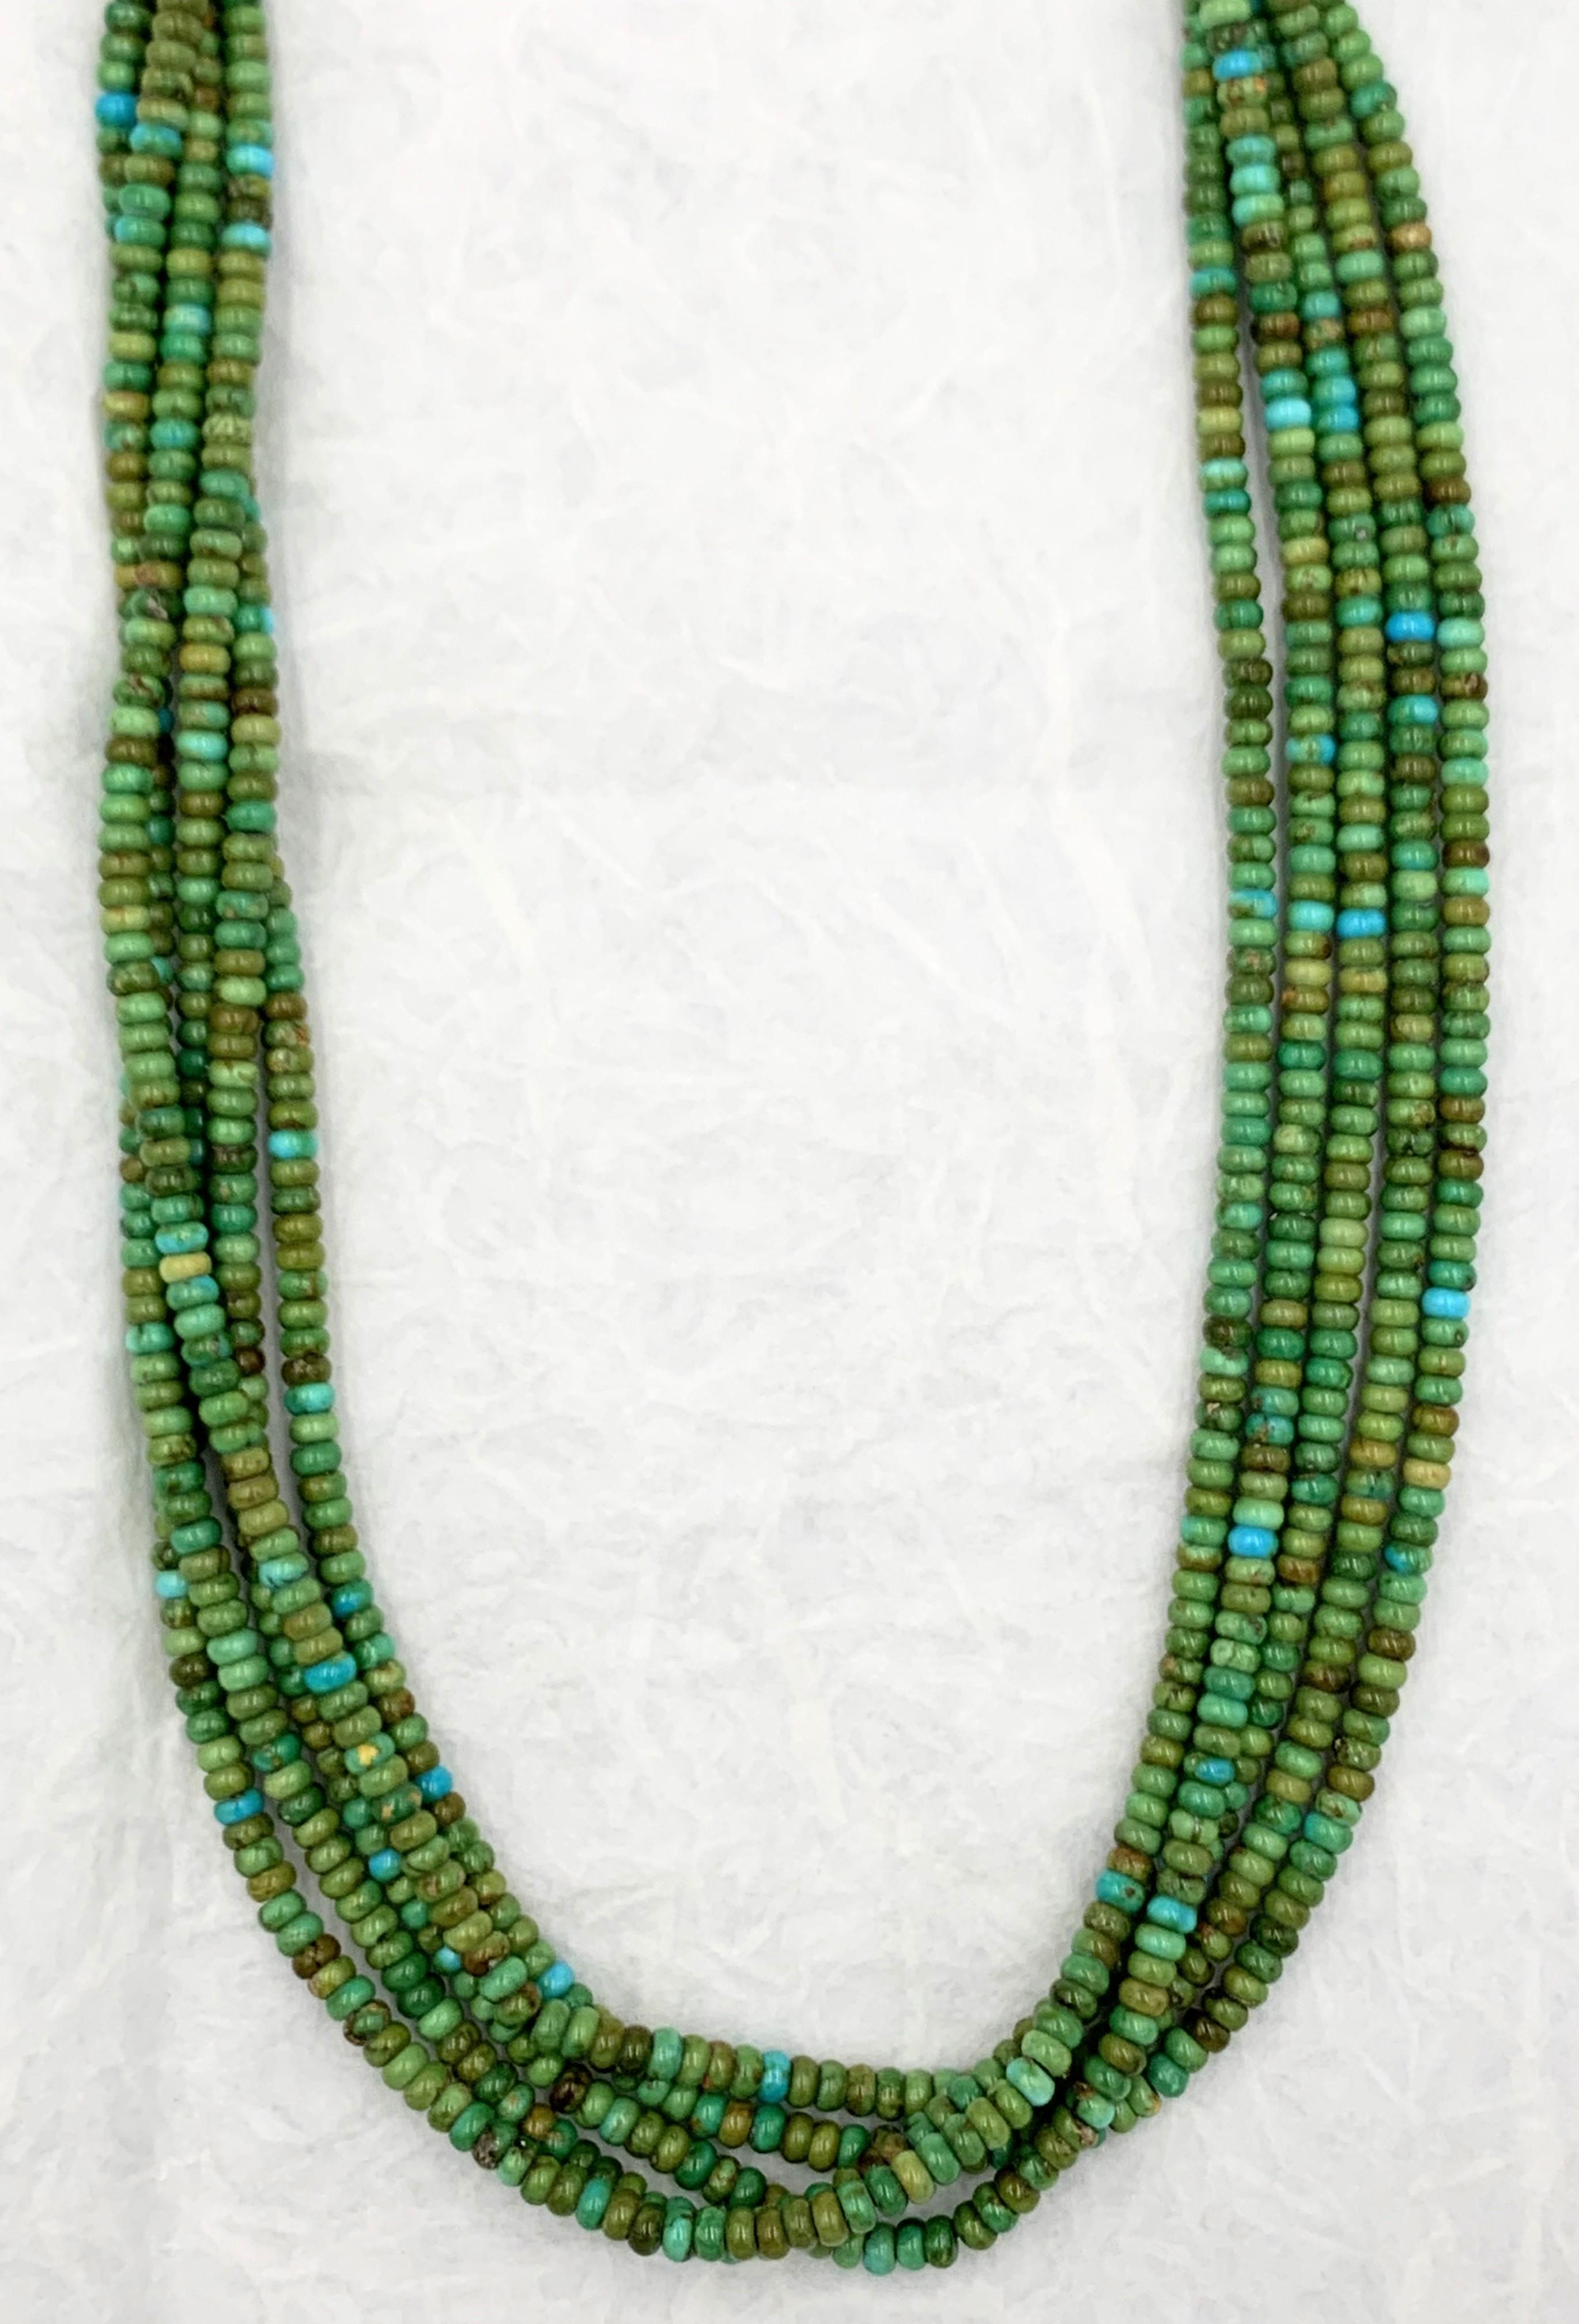 Contemporary Heishi Style Sonoran Gold Turquoise Beaded Necklace Five Strands In New Condition For Sale In Scottsdale, AZ